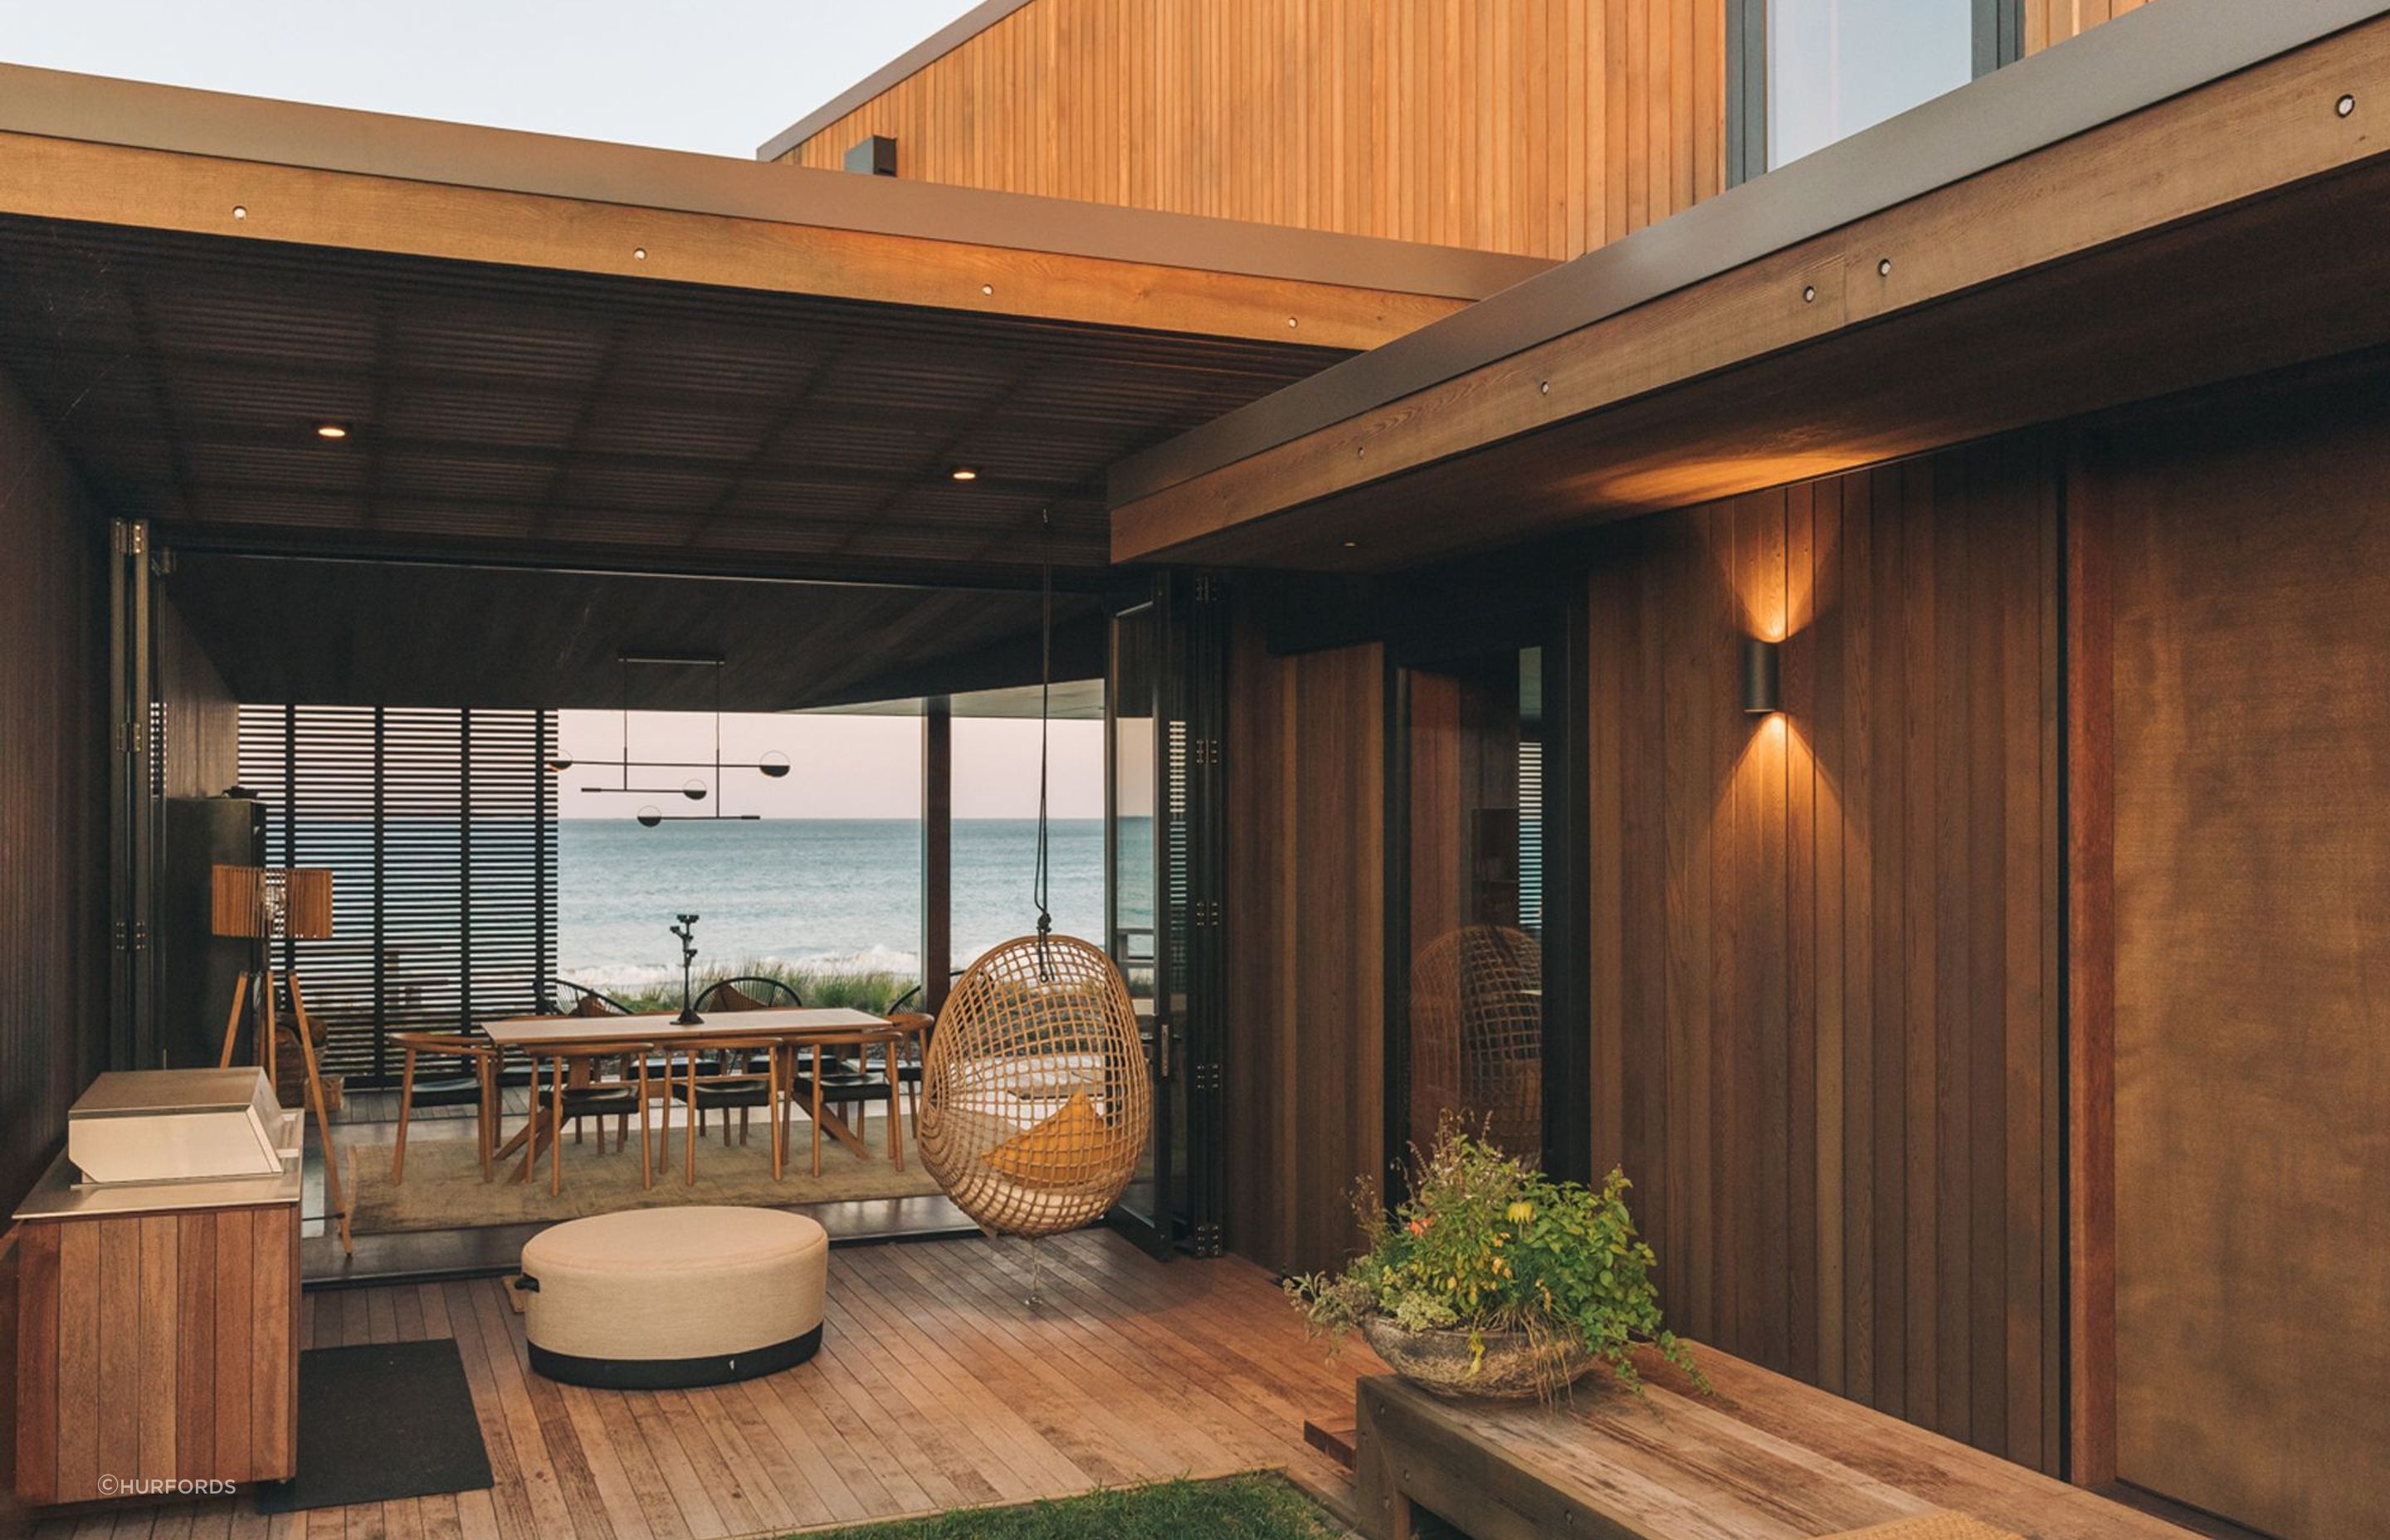 Hurford's Kwila Timber Decking showcases the wood's natural rich appearance beautifully